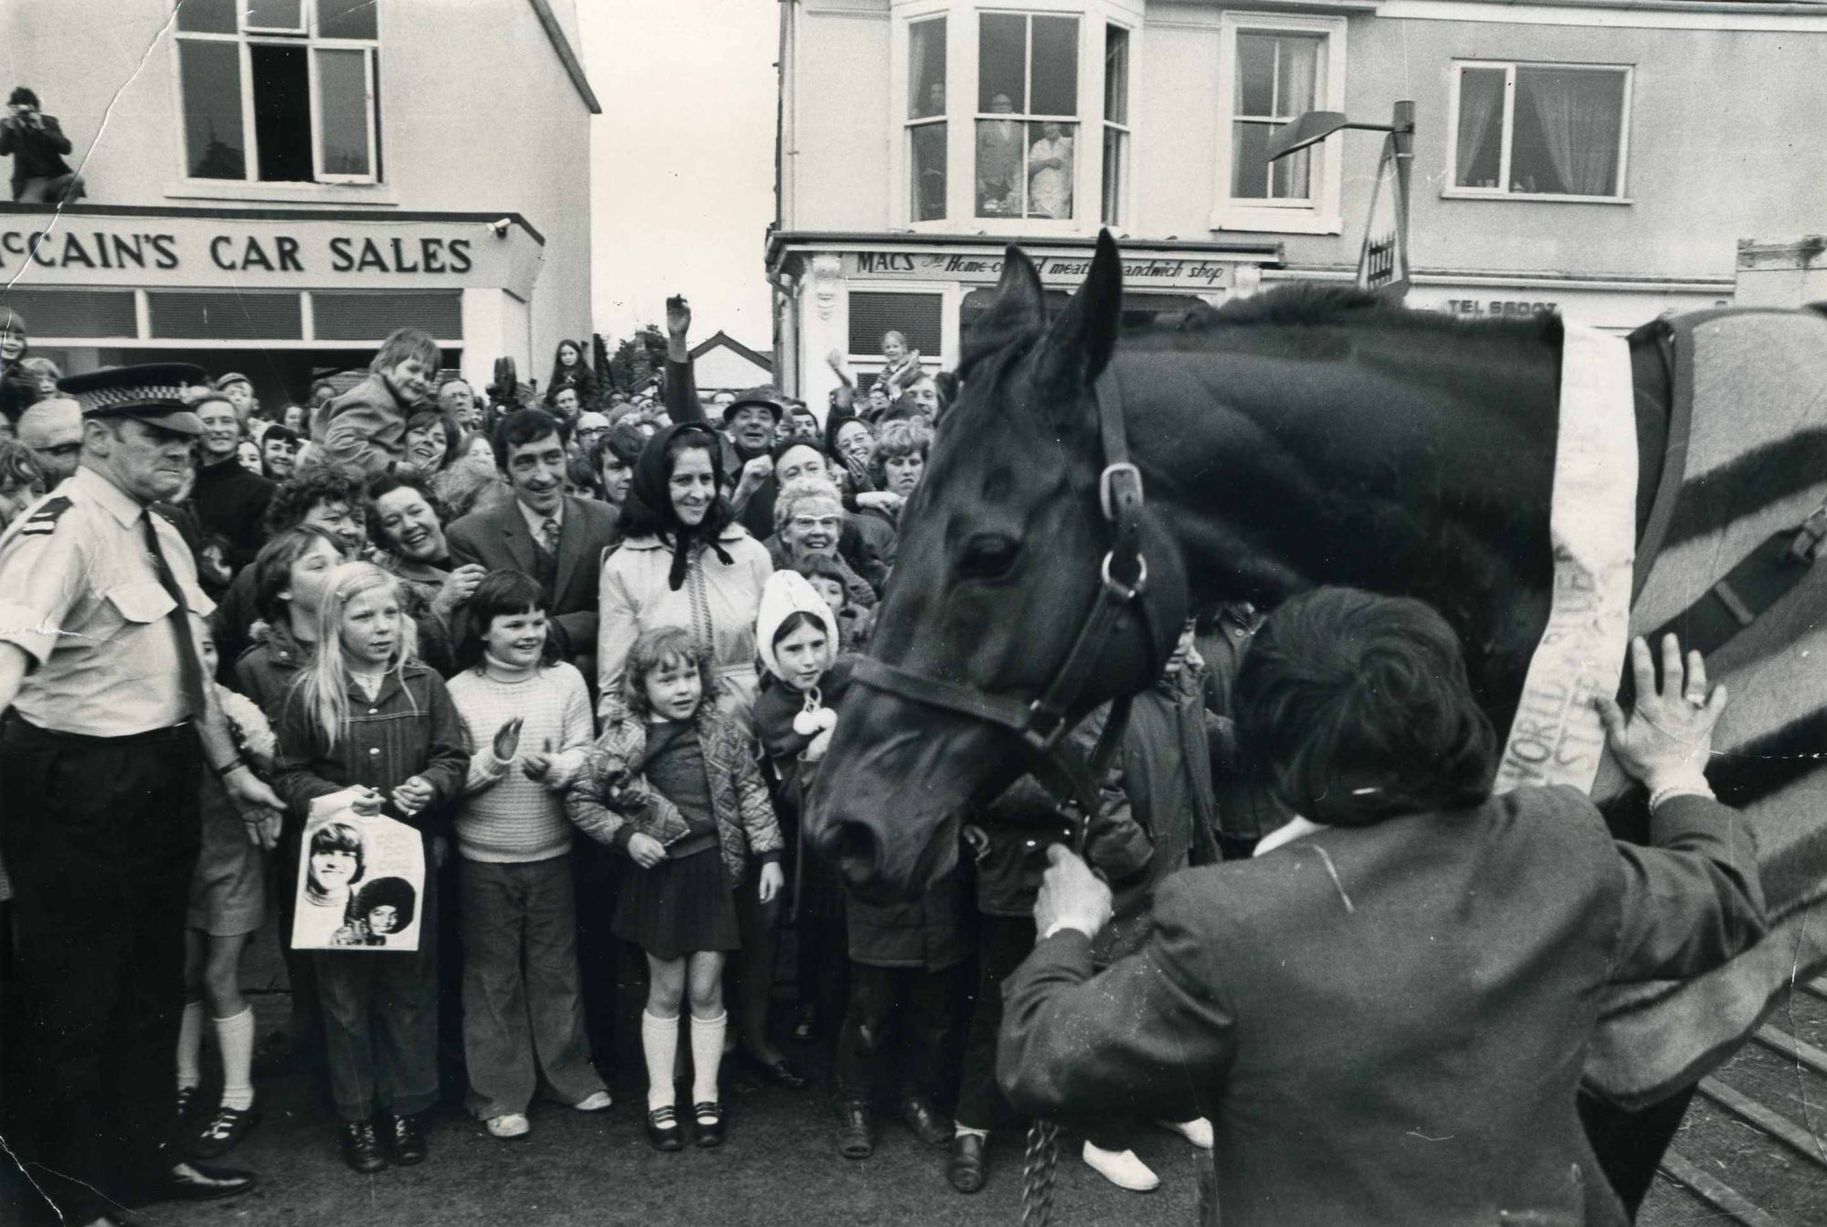 Red Rum makes a triumphant return to his stables in Birkdale, Southport, after his 1973 Grand National victory